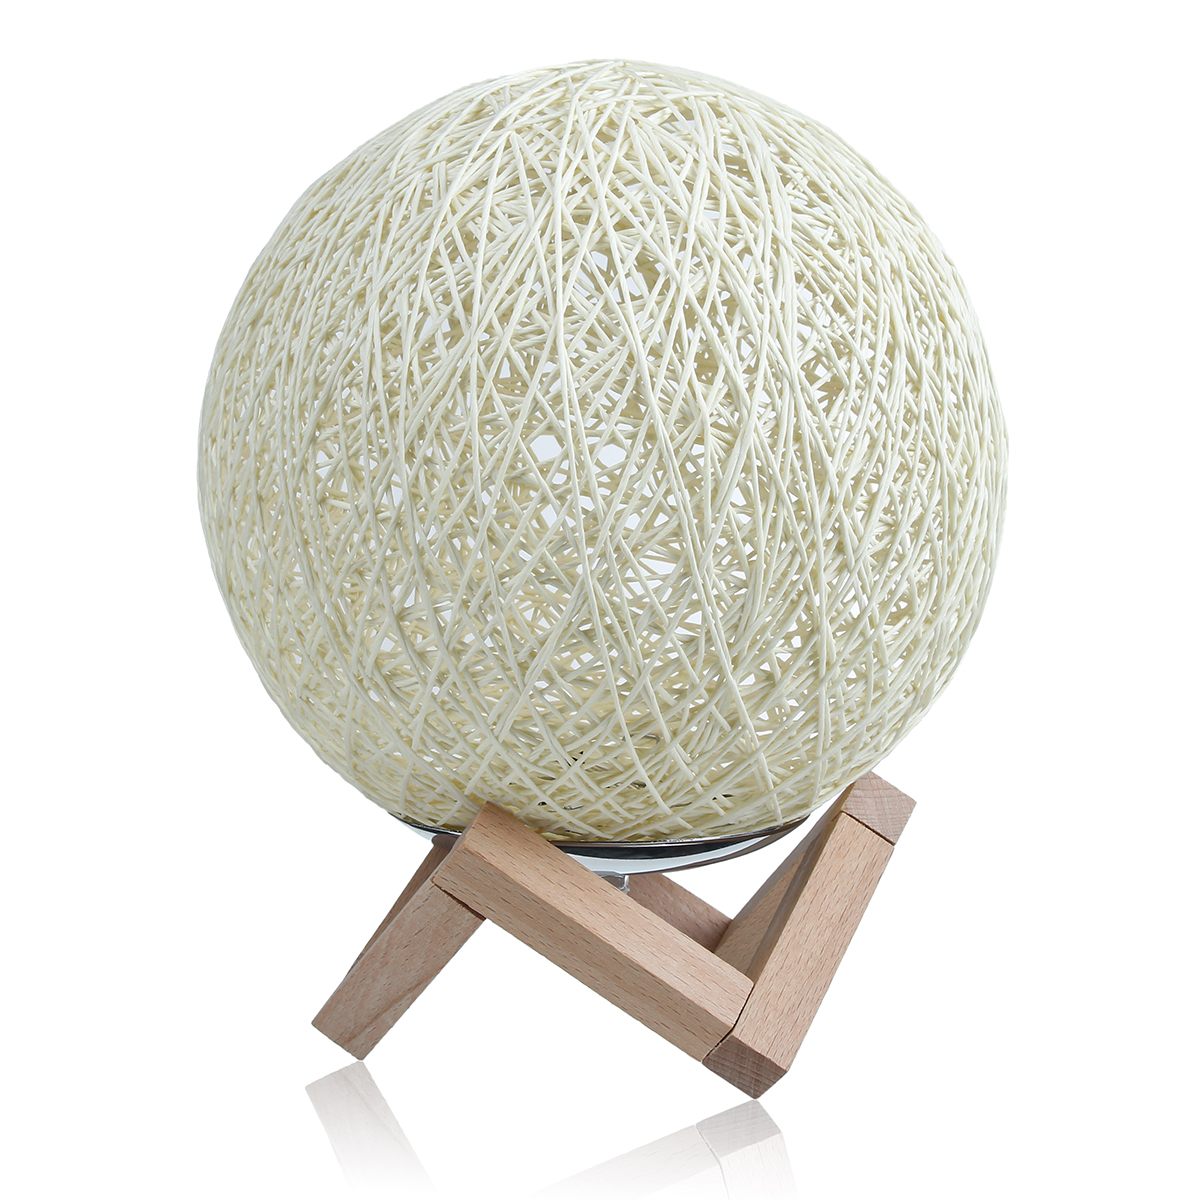 USB-Wooden-Rattan-Table-Light-Dimming-Desk-Bedroom-Night-LED-Ball-Home-Decorations-1627078-6